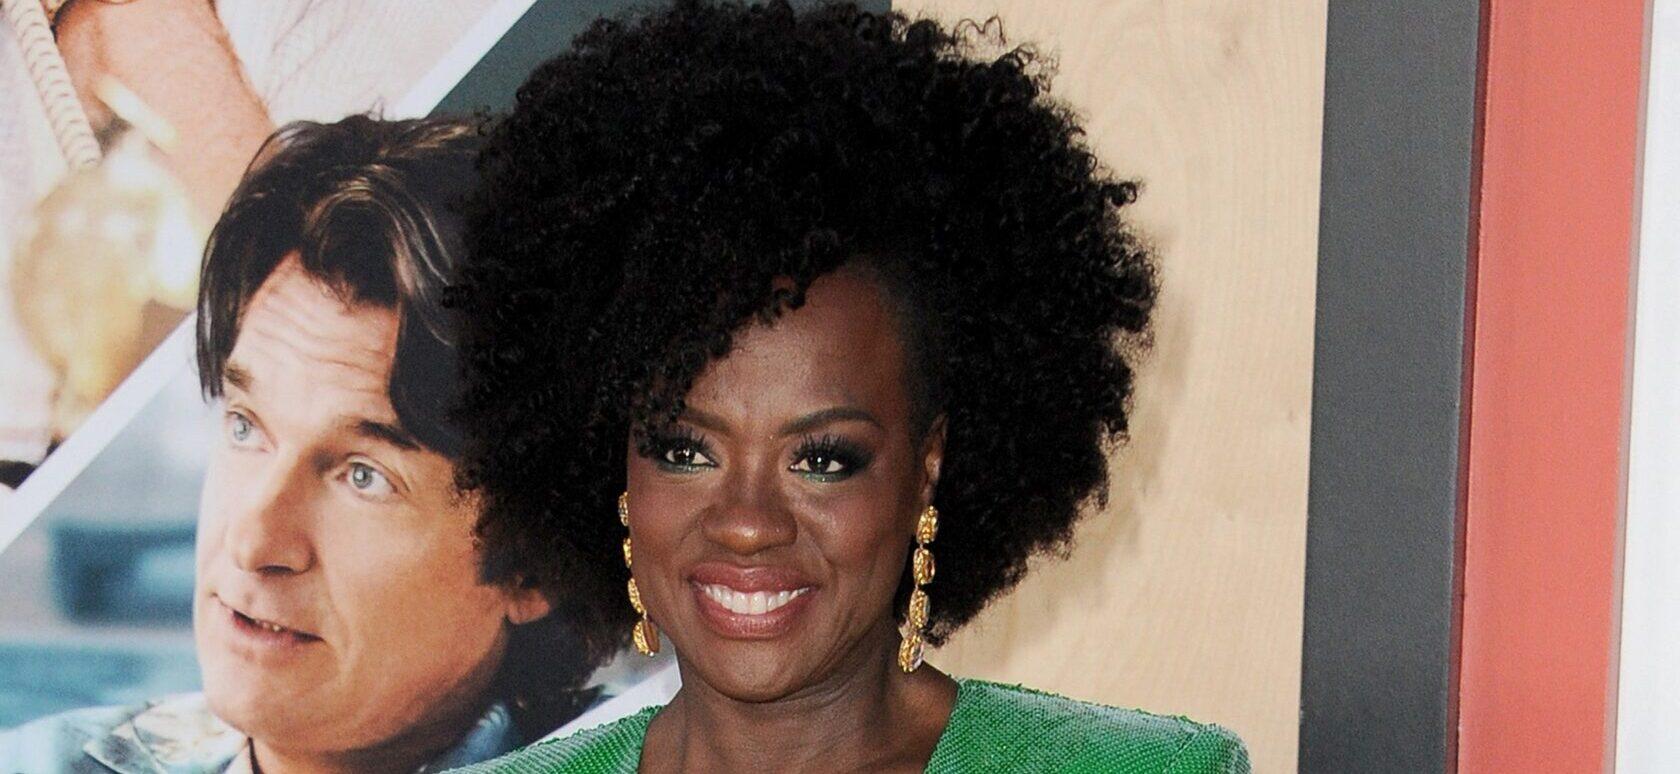 Fans Gush About Striking Resemblance Of Viola Davis And Daughter